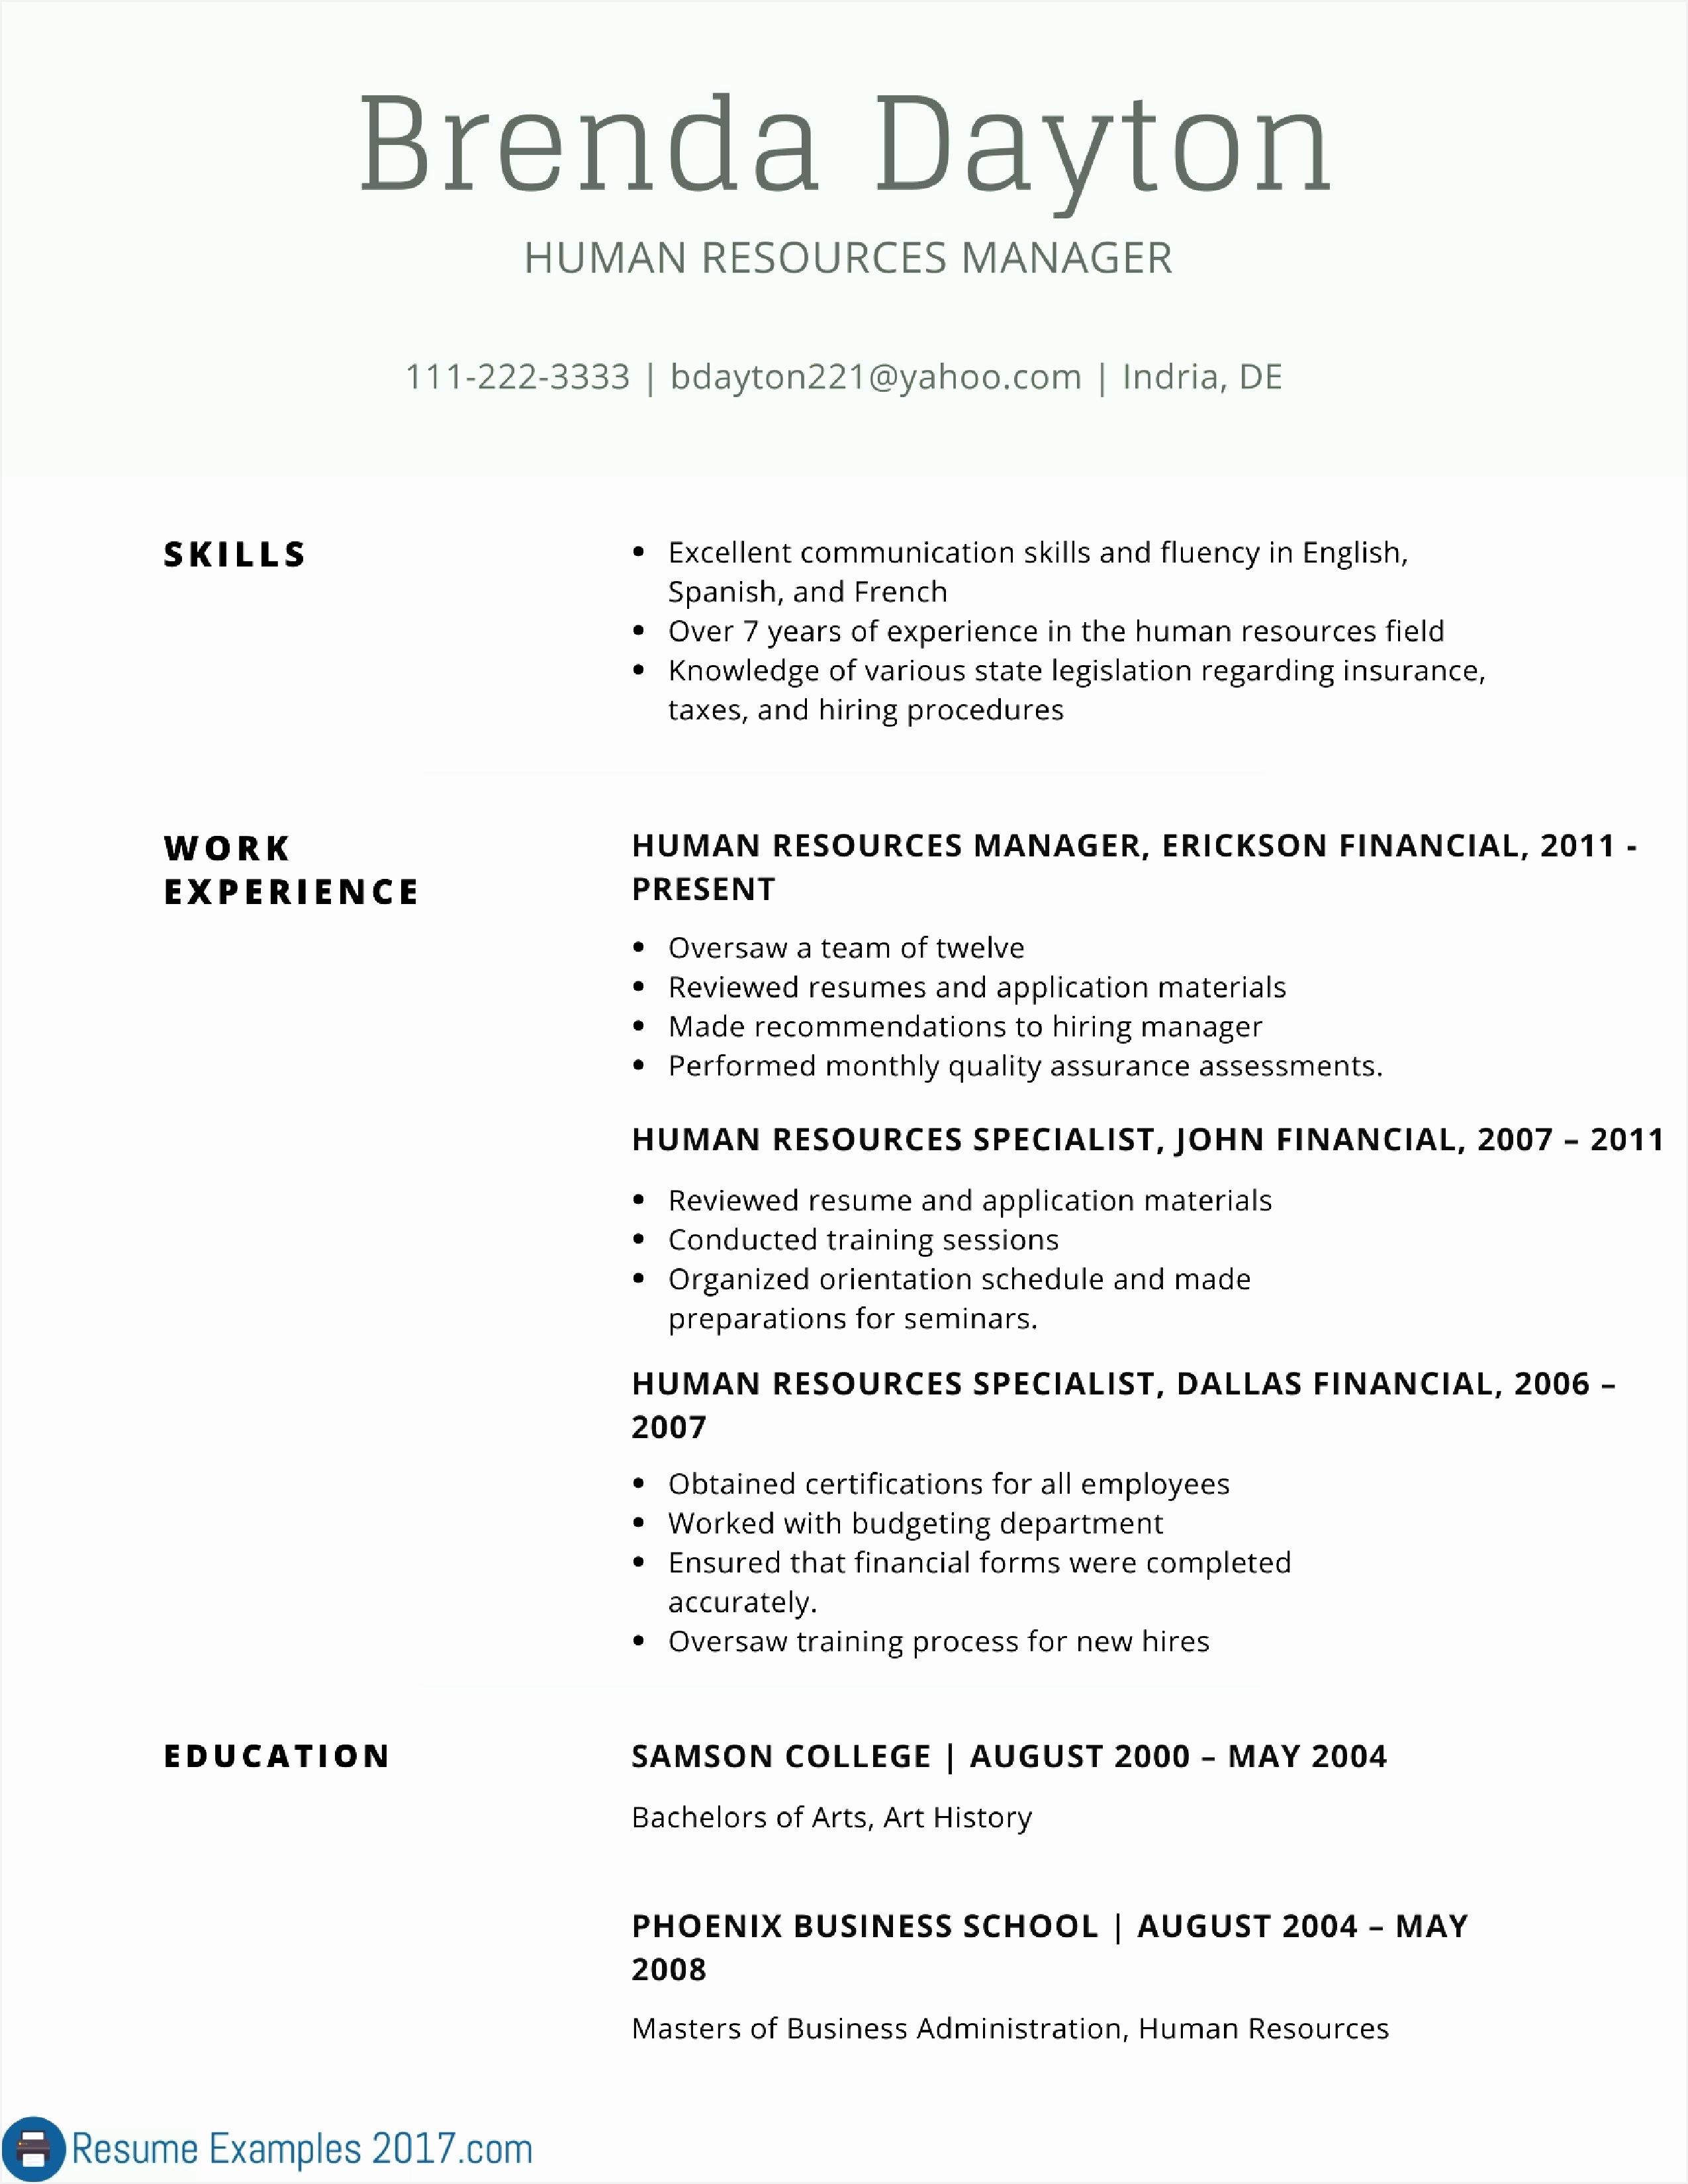 New Resume Sample Best Resume Cover Luxury formatted Resume 0d33002550